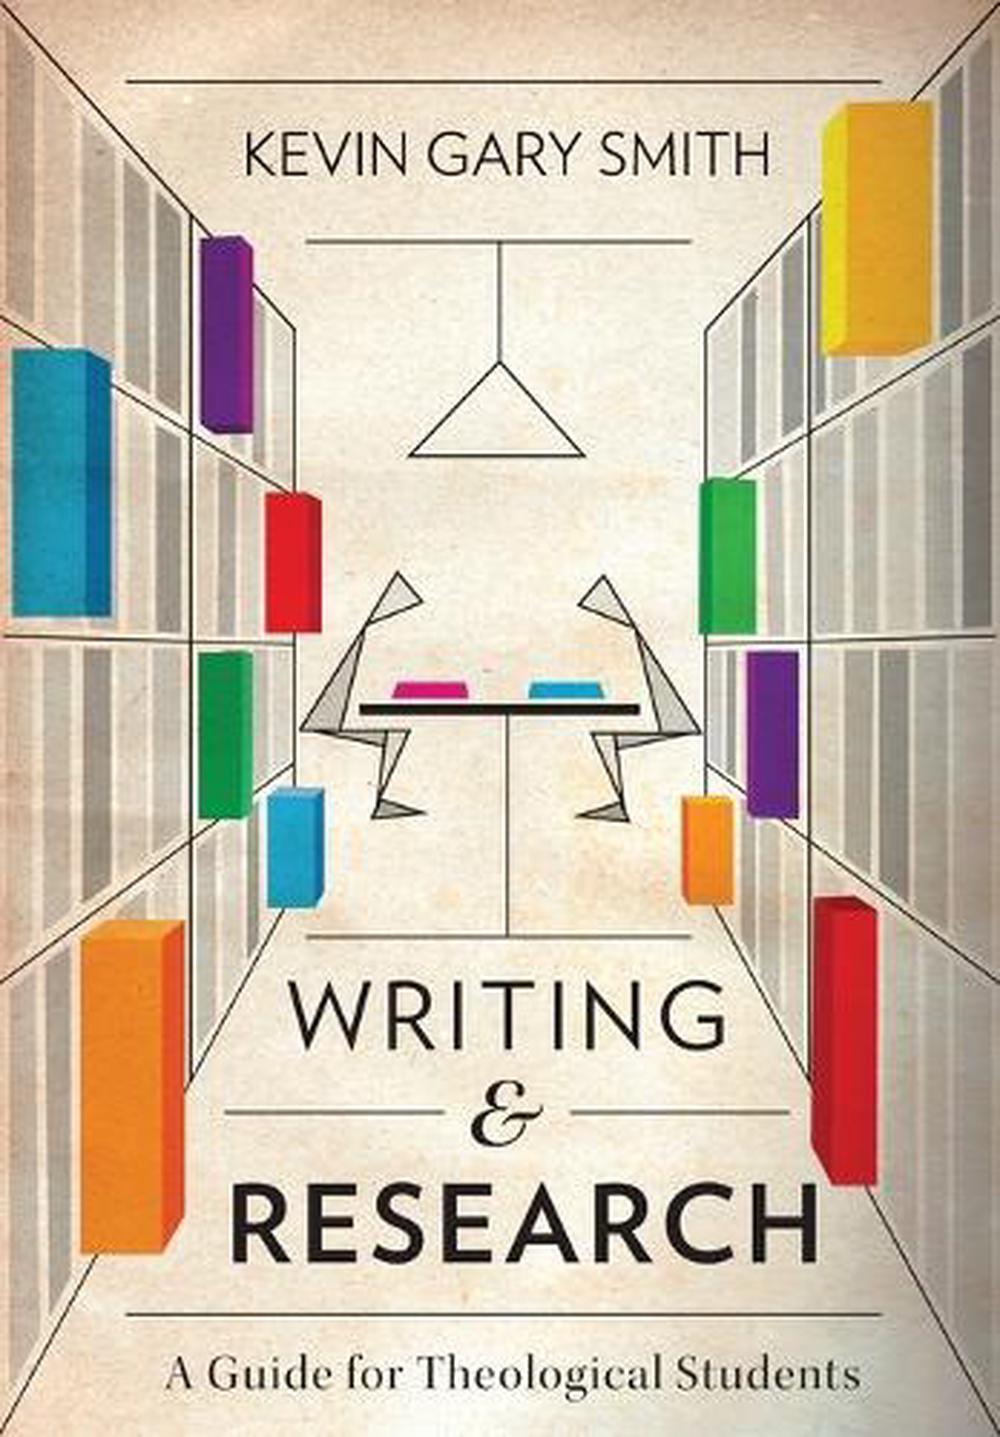 Writing and Research A Guide for Theological Students by Kevin Gary